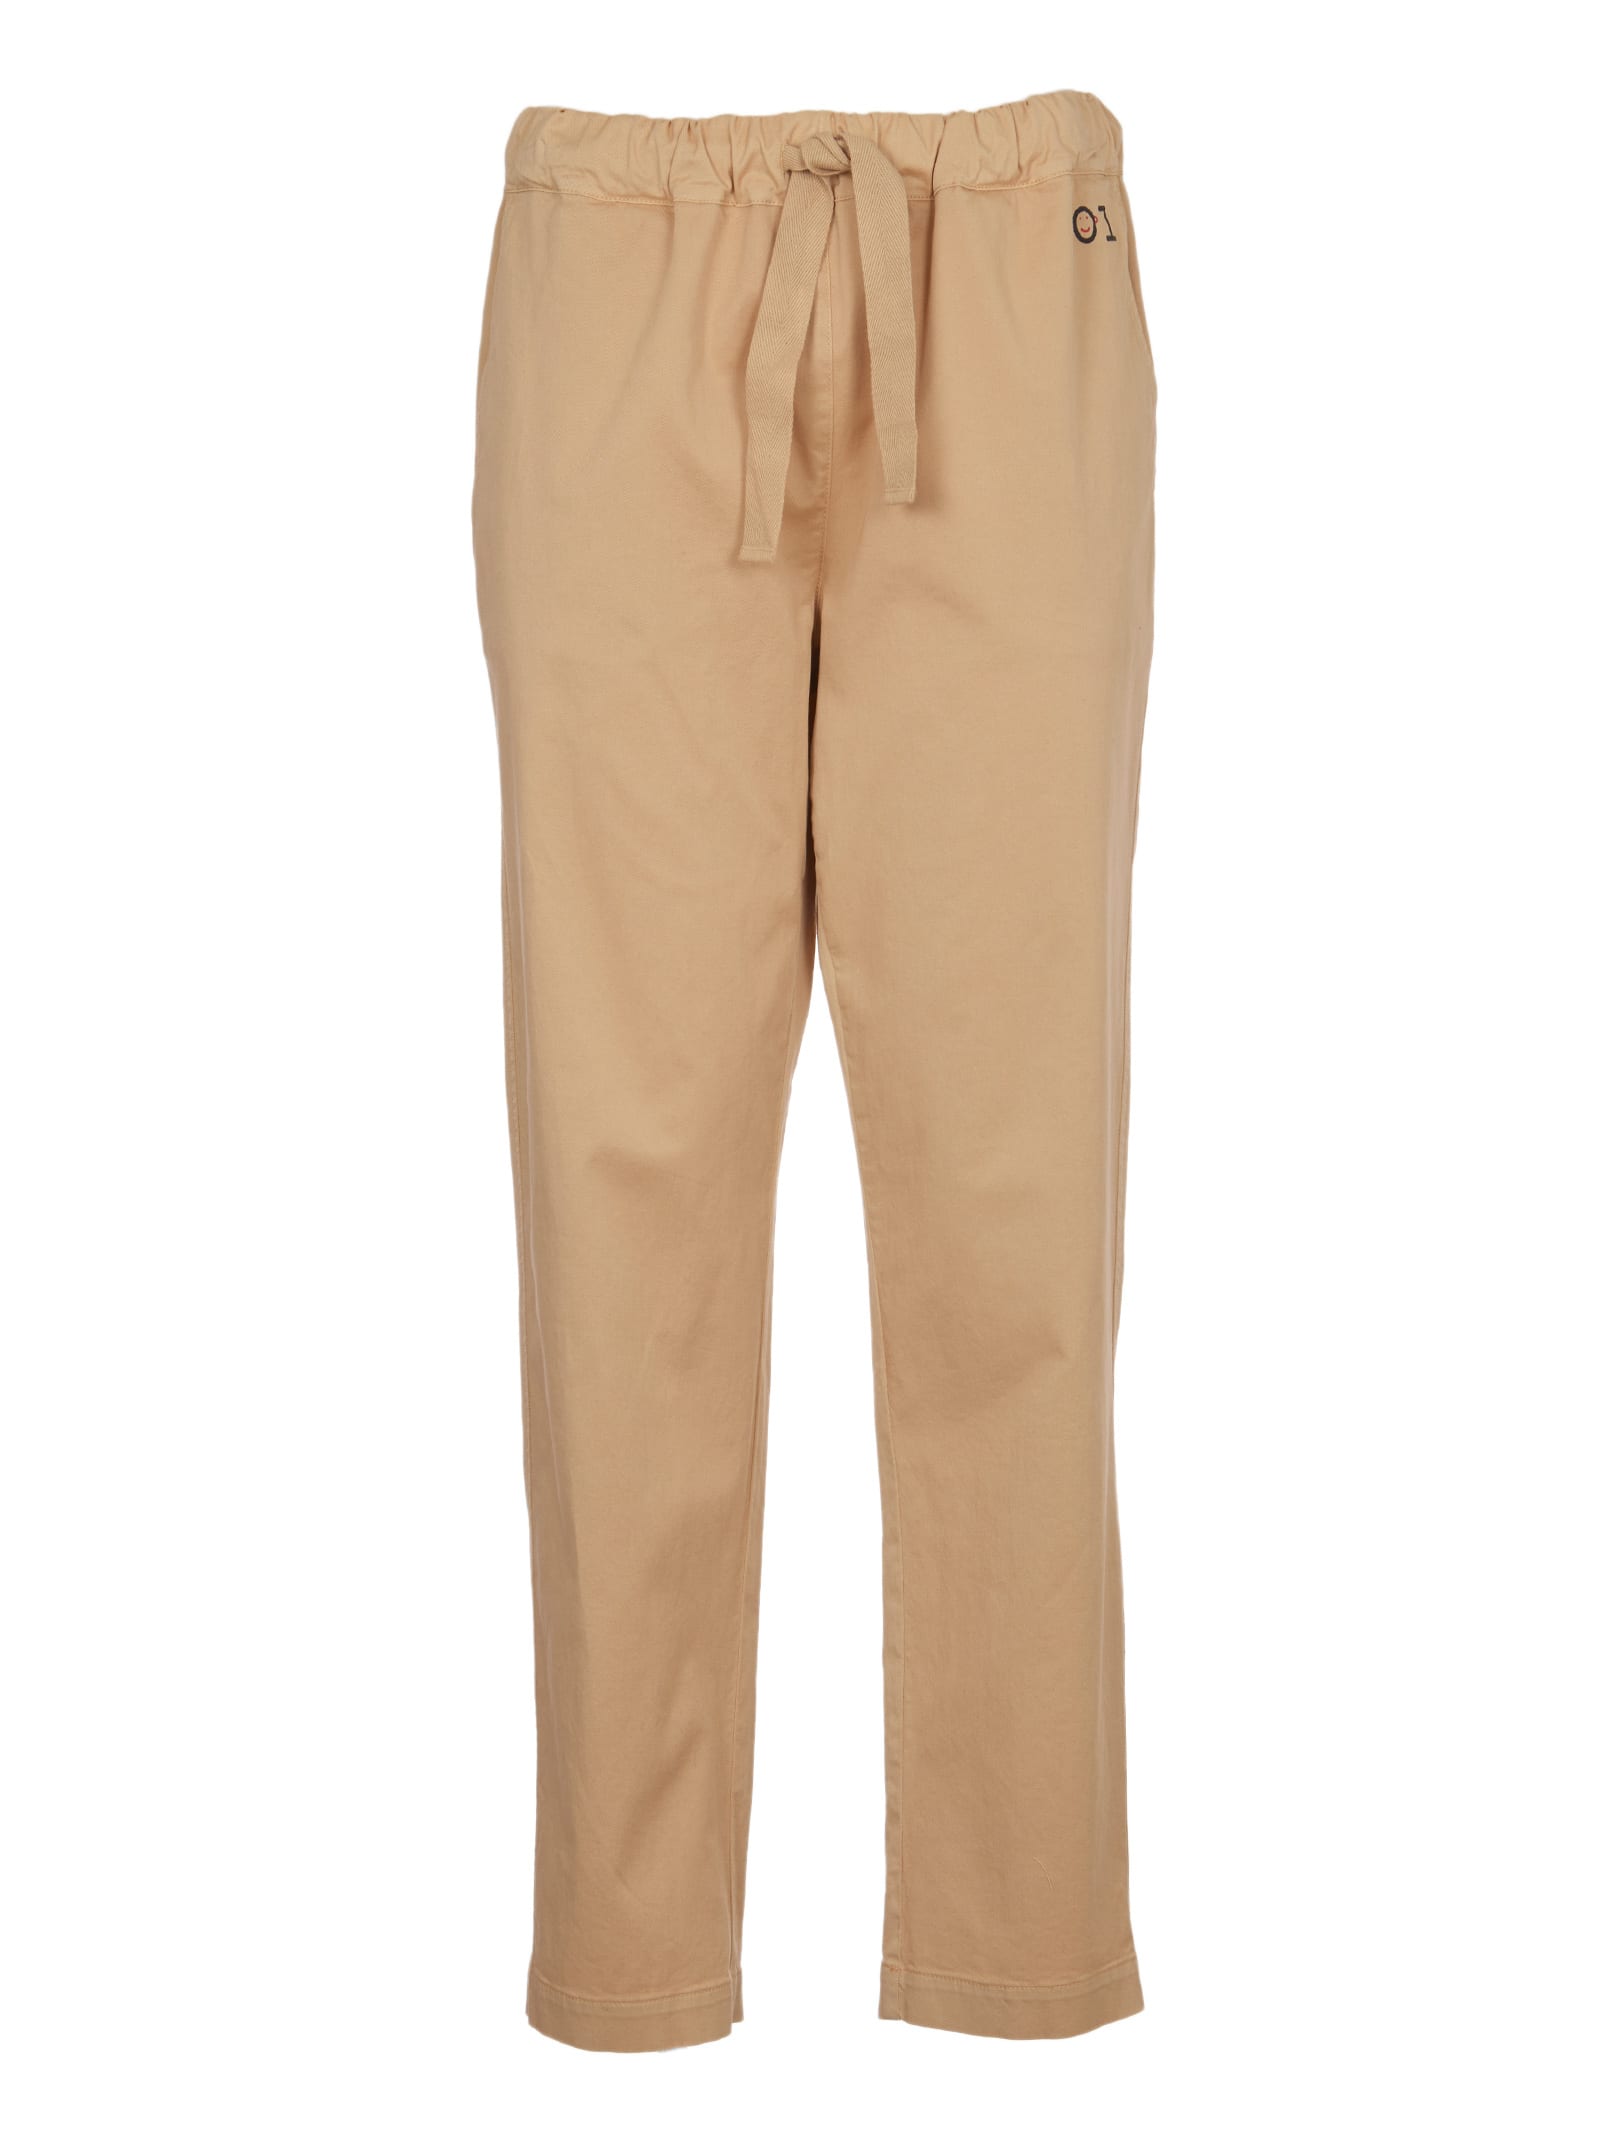 SEMICOUTURE Beige Trousers